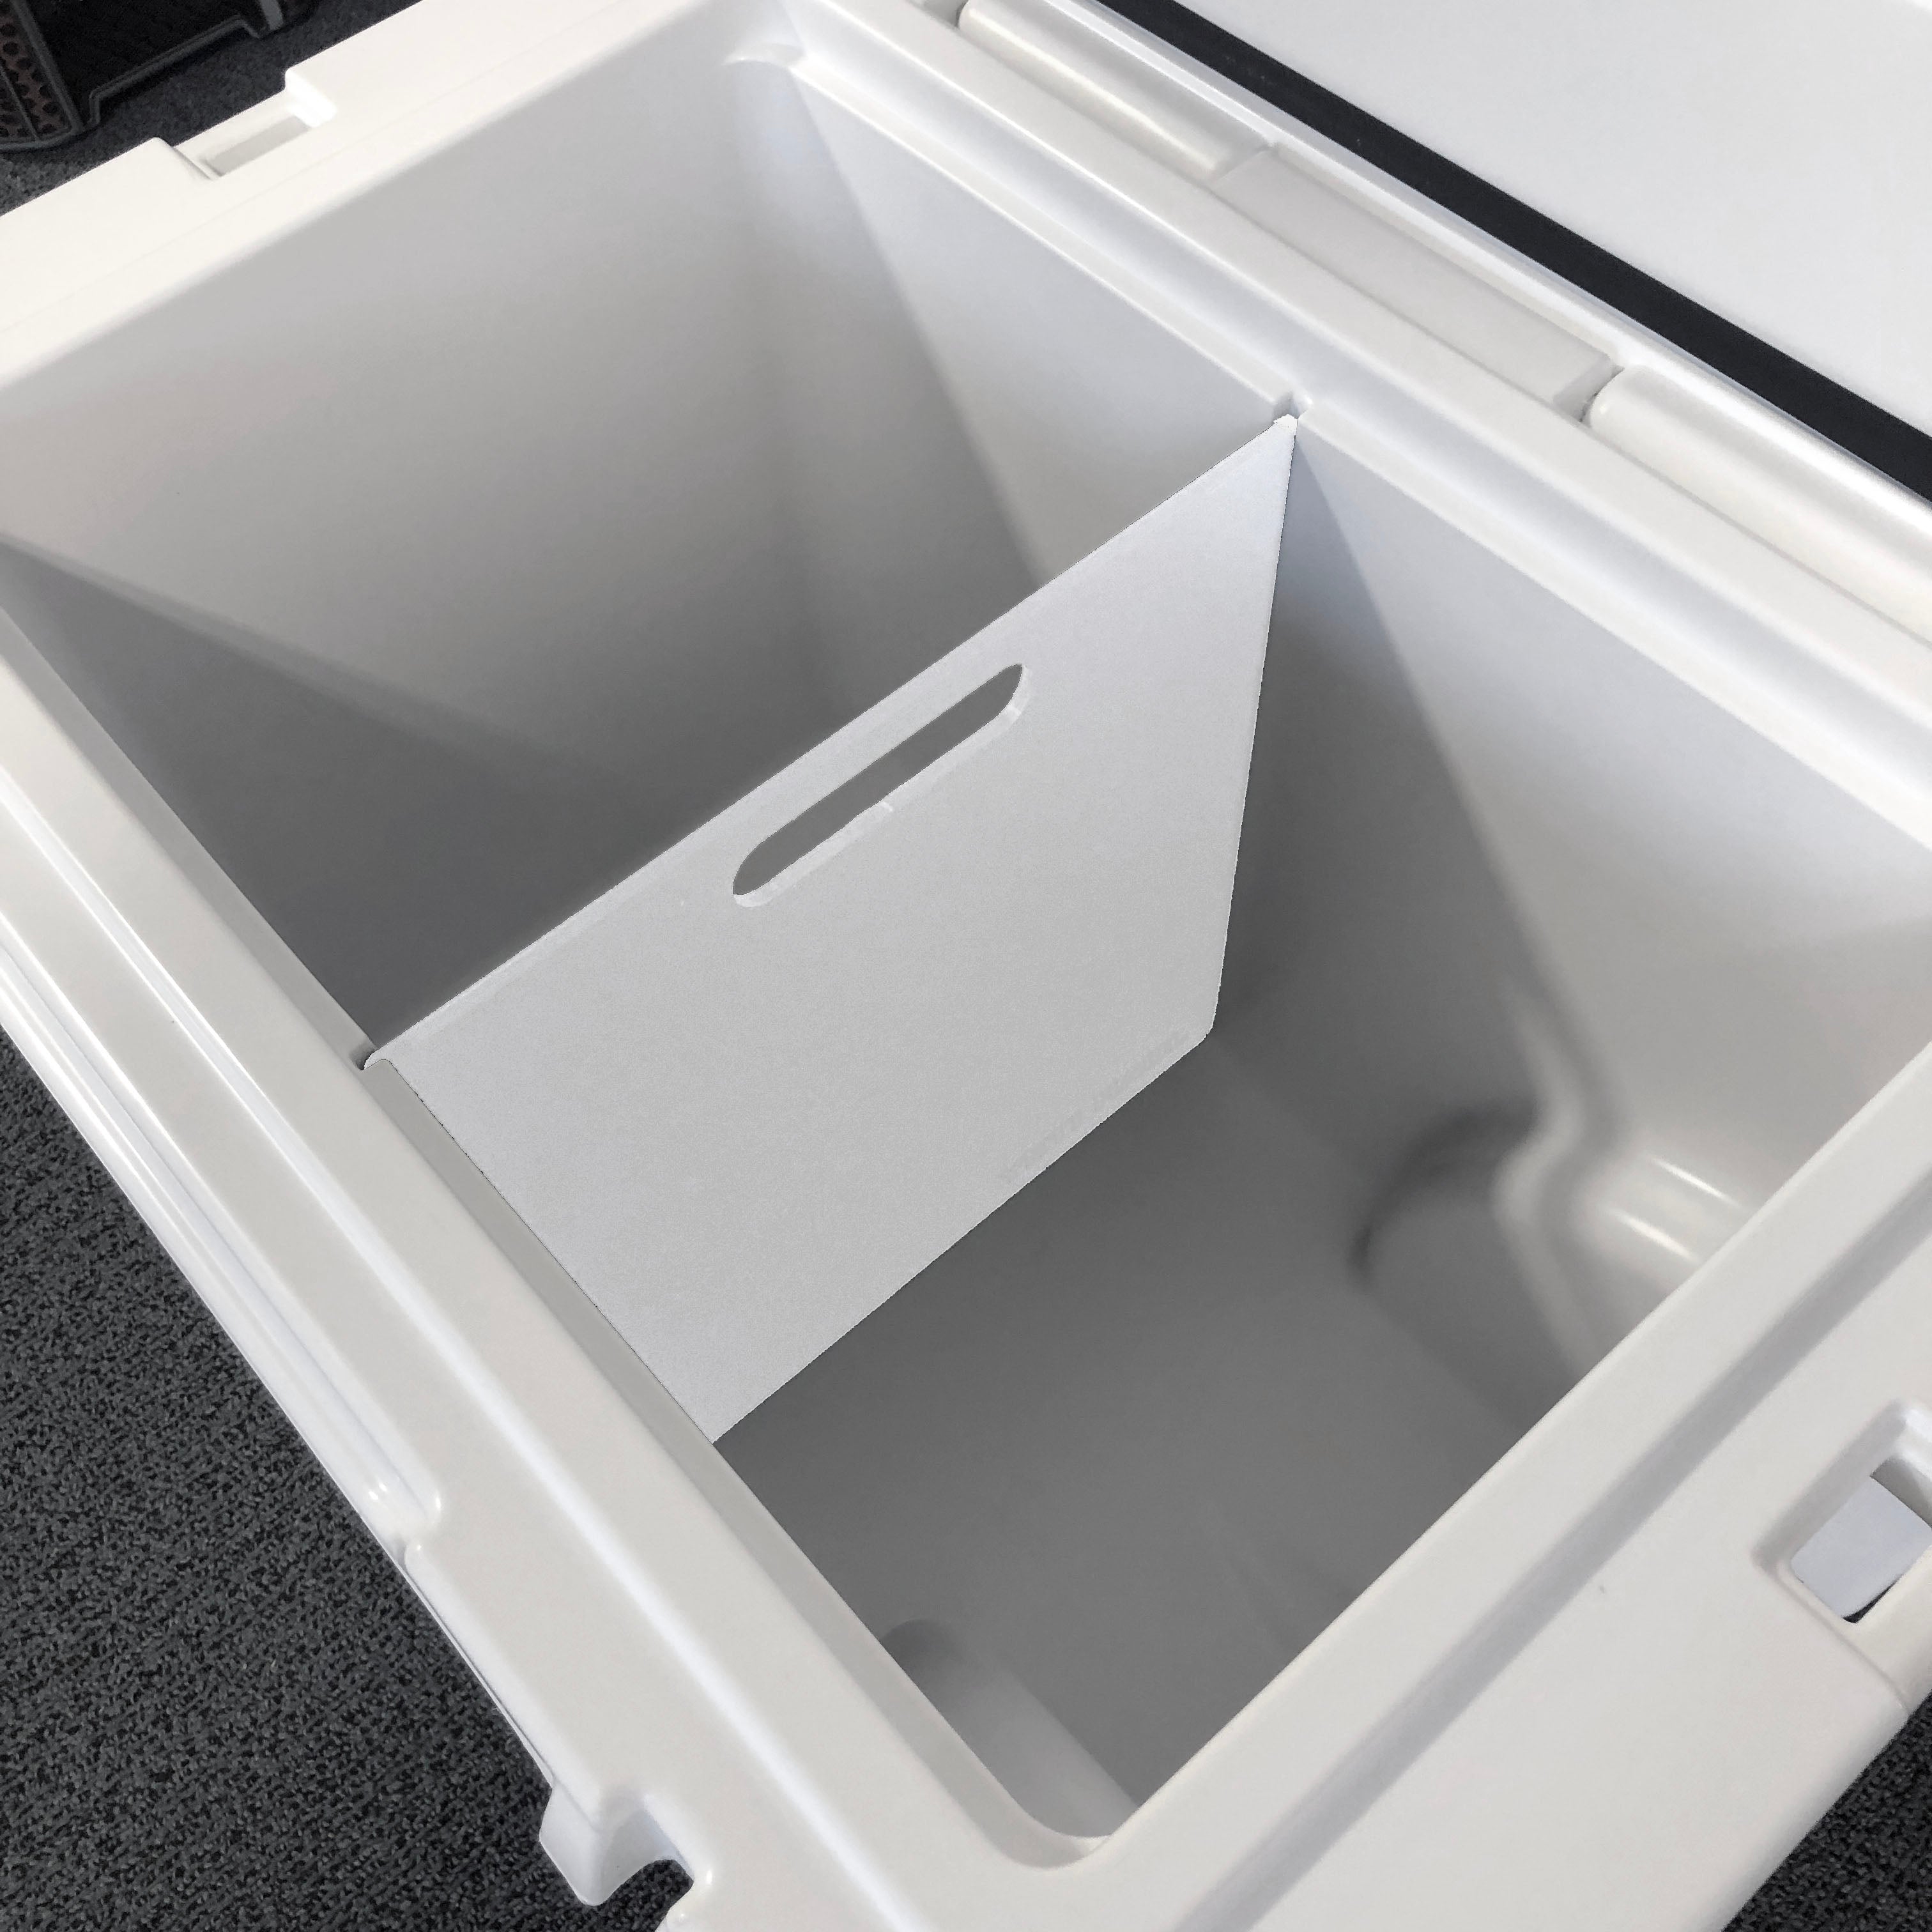 ForeShore Diamond Plate Aluminum Cooler Divider with Removable  Shelf/Cutting Board. Fits YETI Tundra Hard Coolers. Conveniently Keeps  Contents